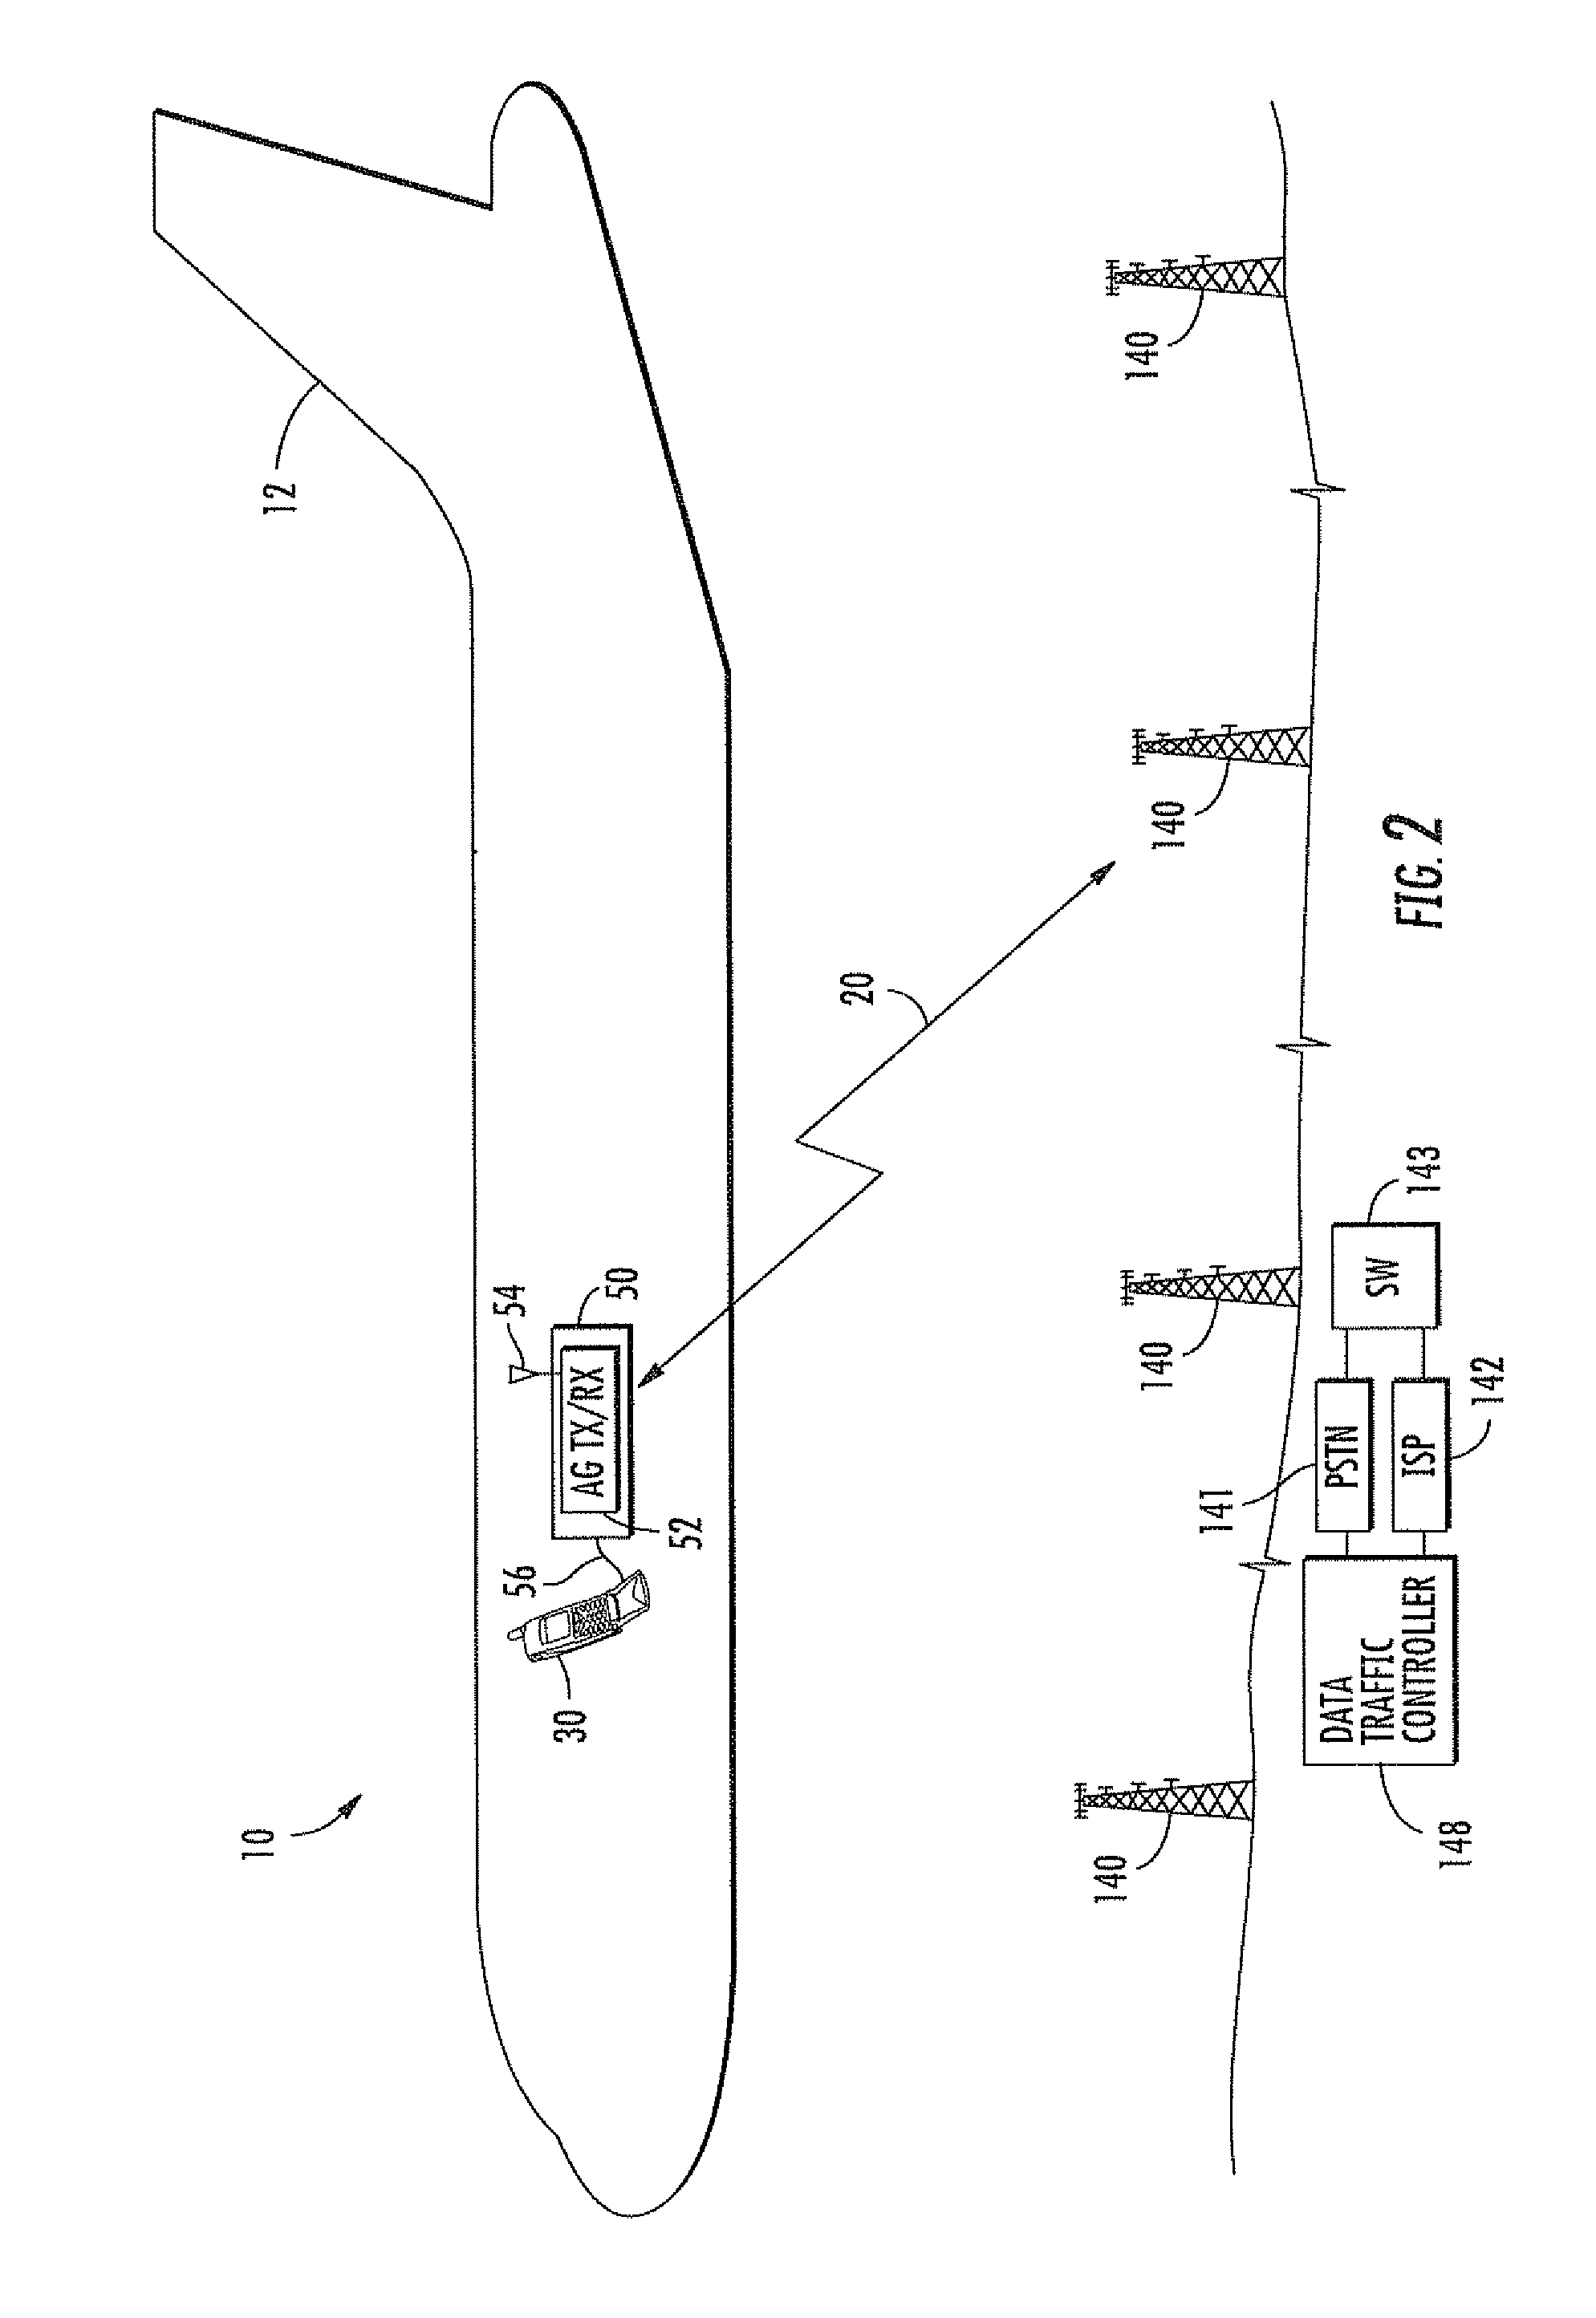 Aircraft ife system interfacing with a personal electronic device (PED) for redeeming an in-flight coupon and associated methods